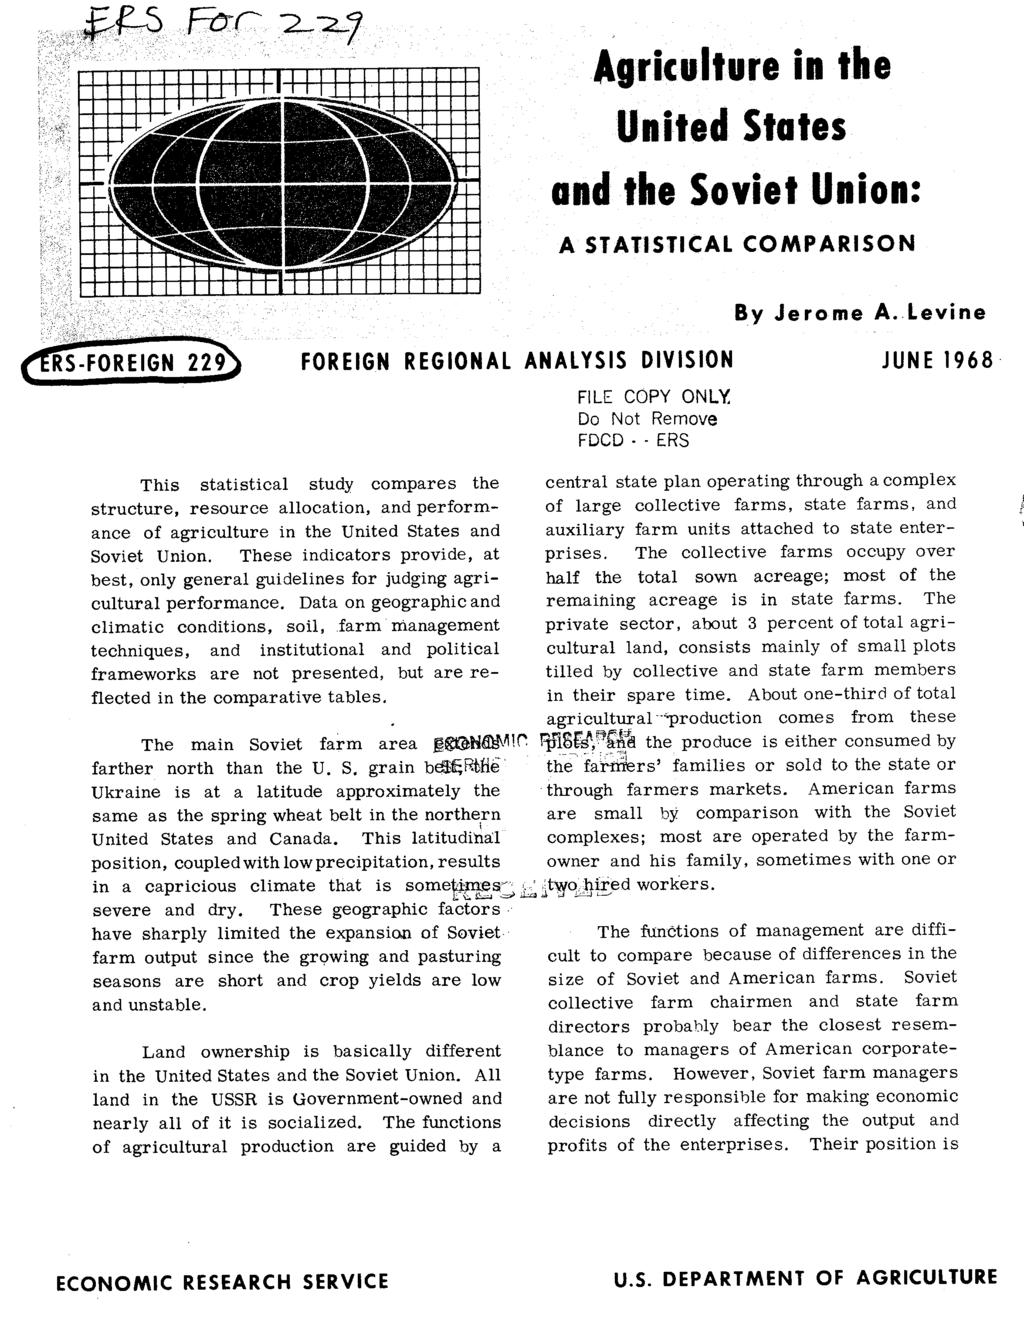 Agriculture in the United States and the Soviet Union: A STATISTICAL COMPARISON By Jerome A Levine FOREIGN REGIONAL ANALYSIS DIVISION FILE COPY ONLY Do Not Remove FDCD ERS JUNE 1968 This statistical